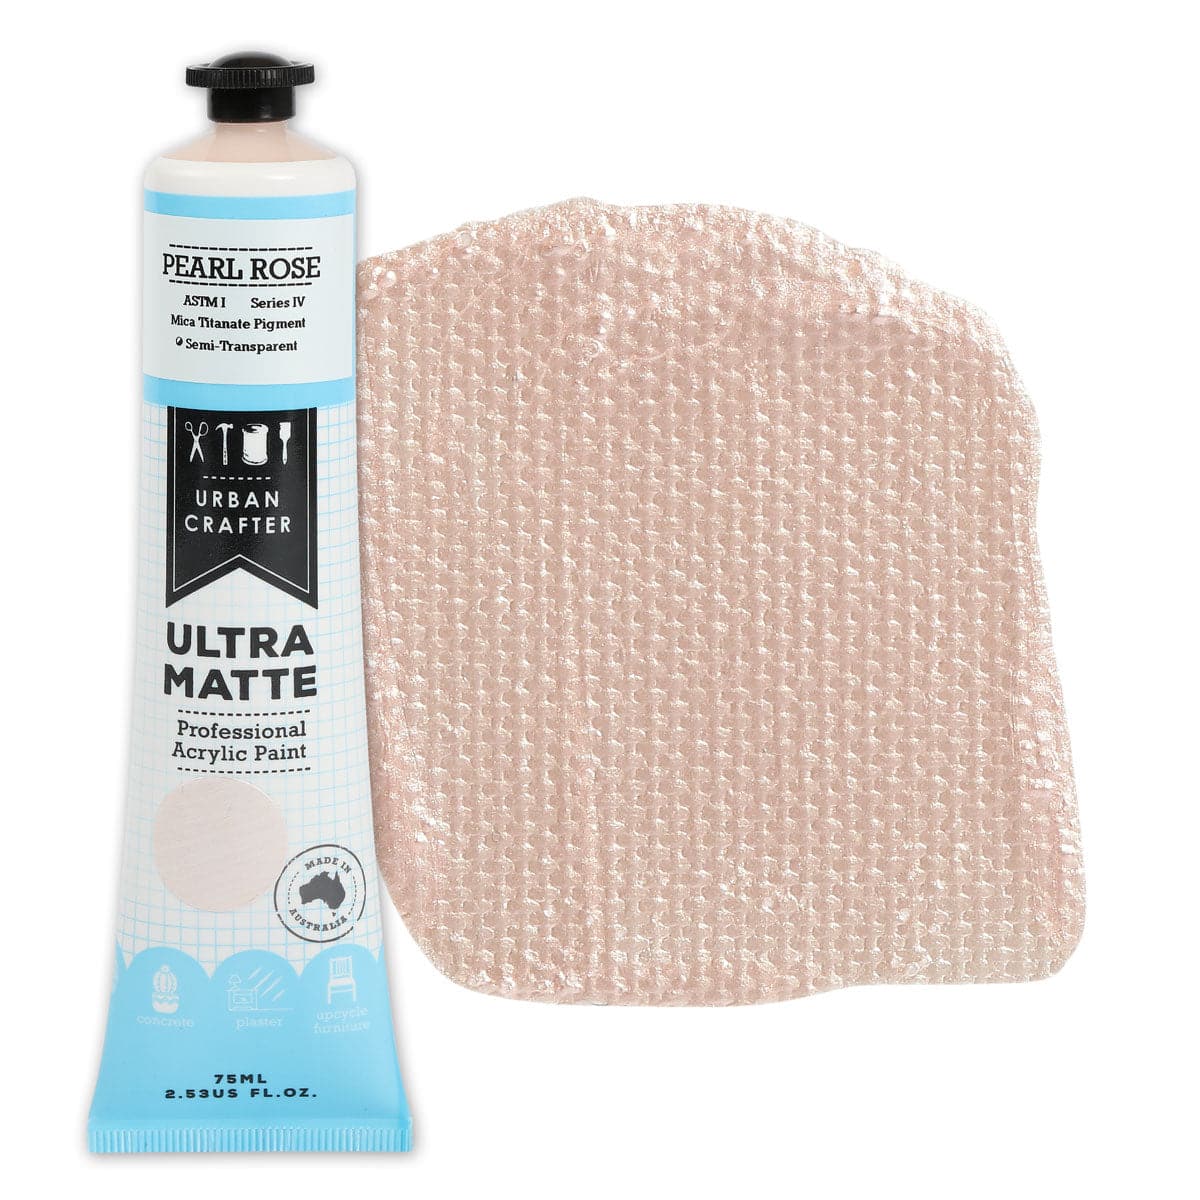 Image of Urban Crafter Ultra Matte Acrylic Paint 75ml Pearl Rose S4 ASTM1 Semi-Transparent